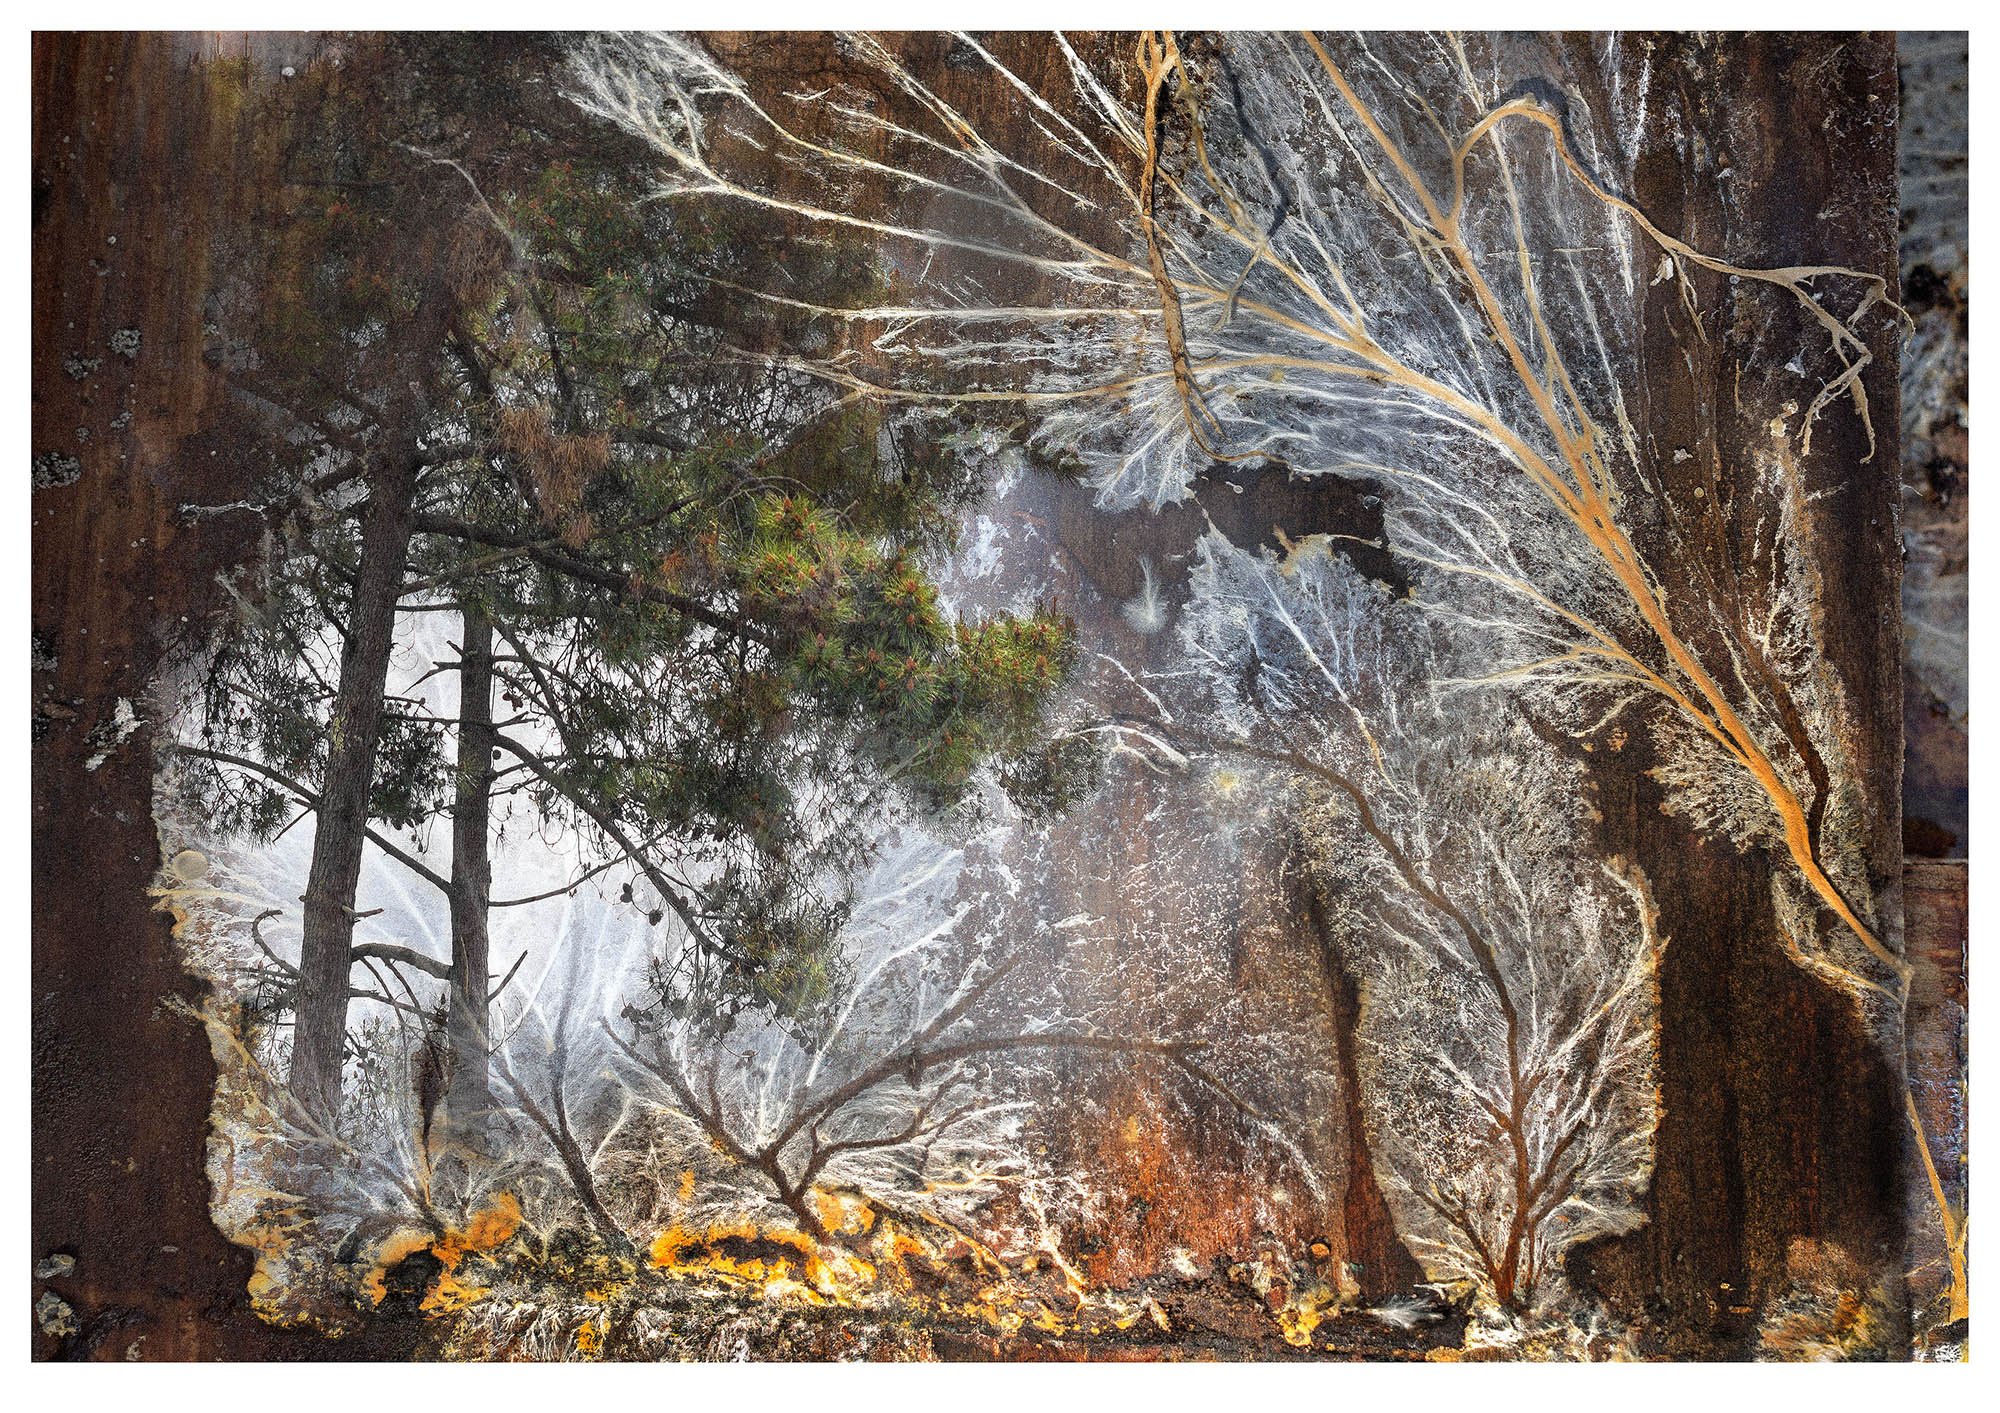 Photographed white wood fungus with overlaid pine trees make this composite photograph form a new fantasy forest landscape